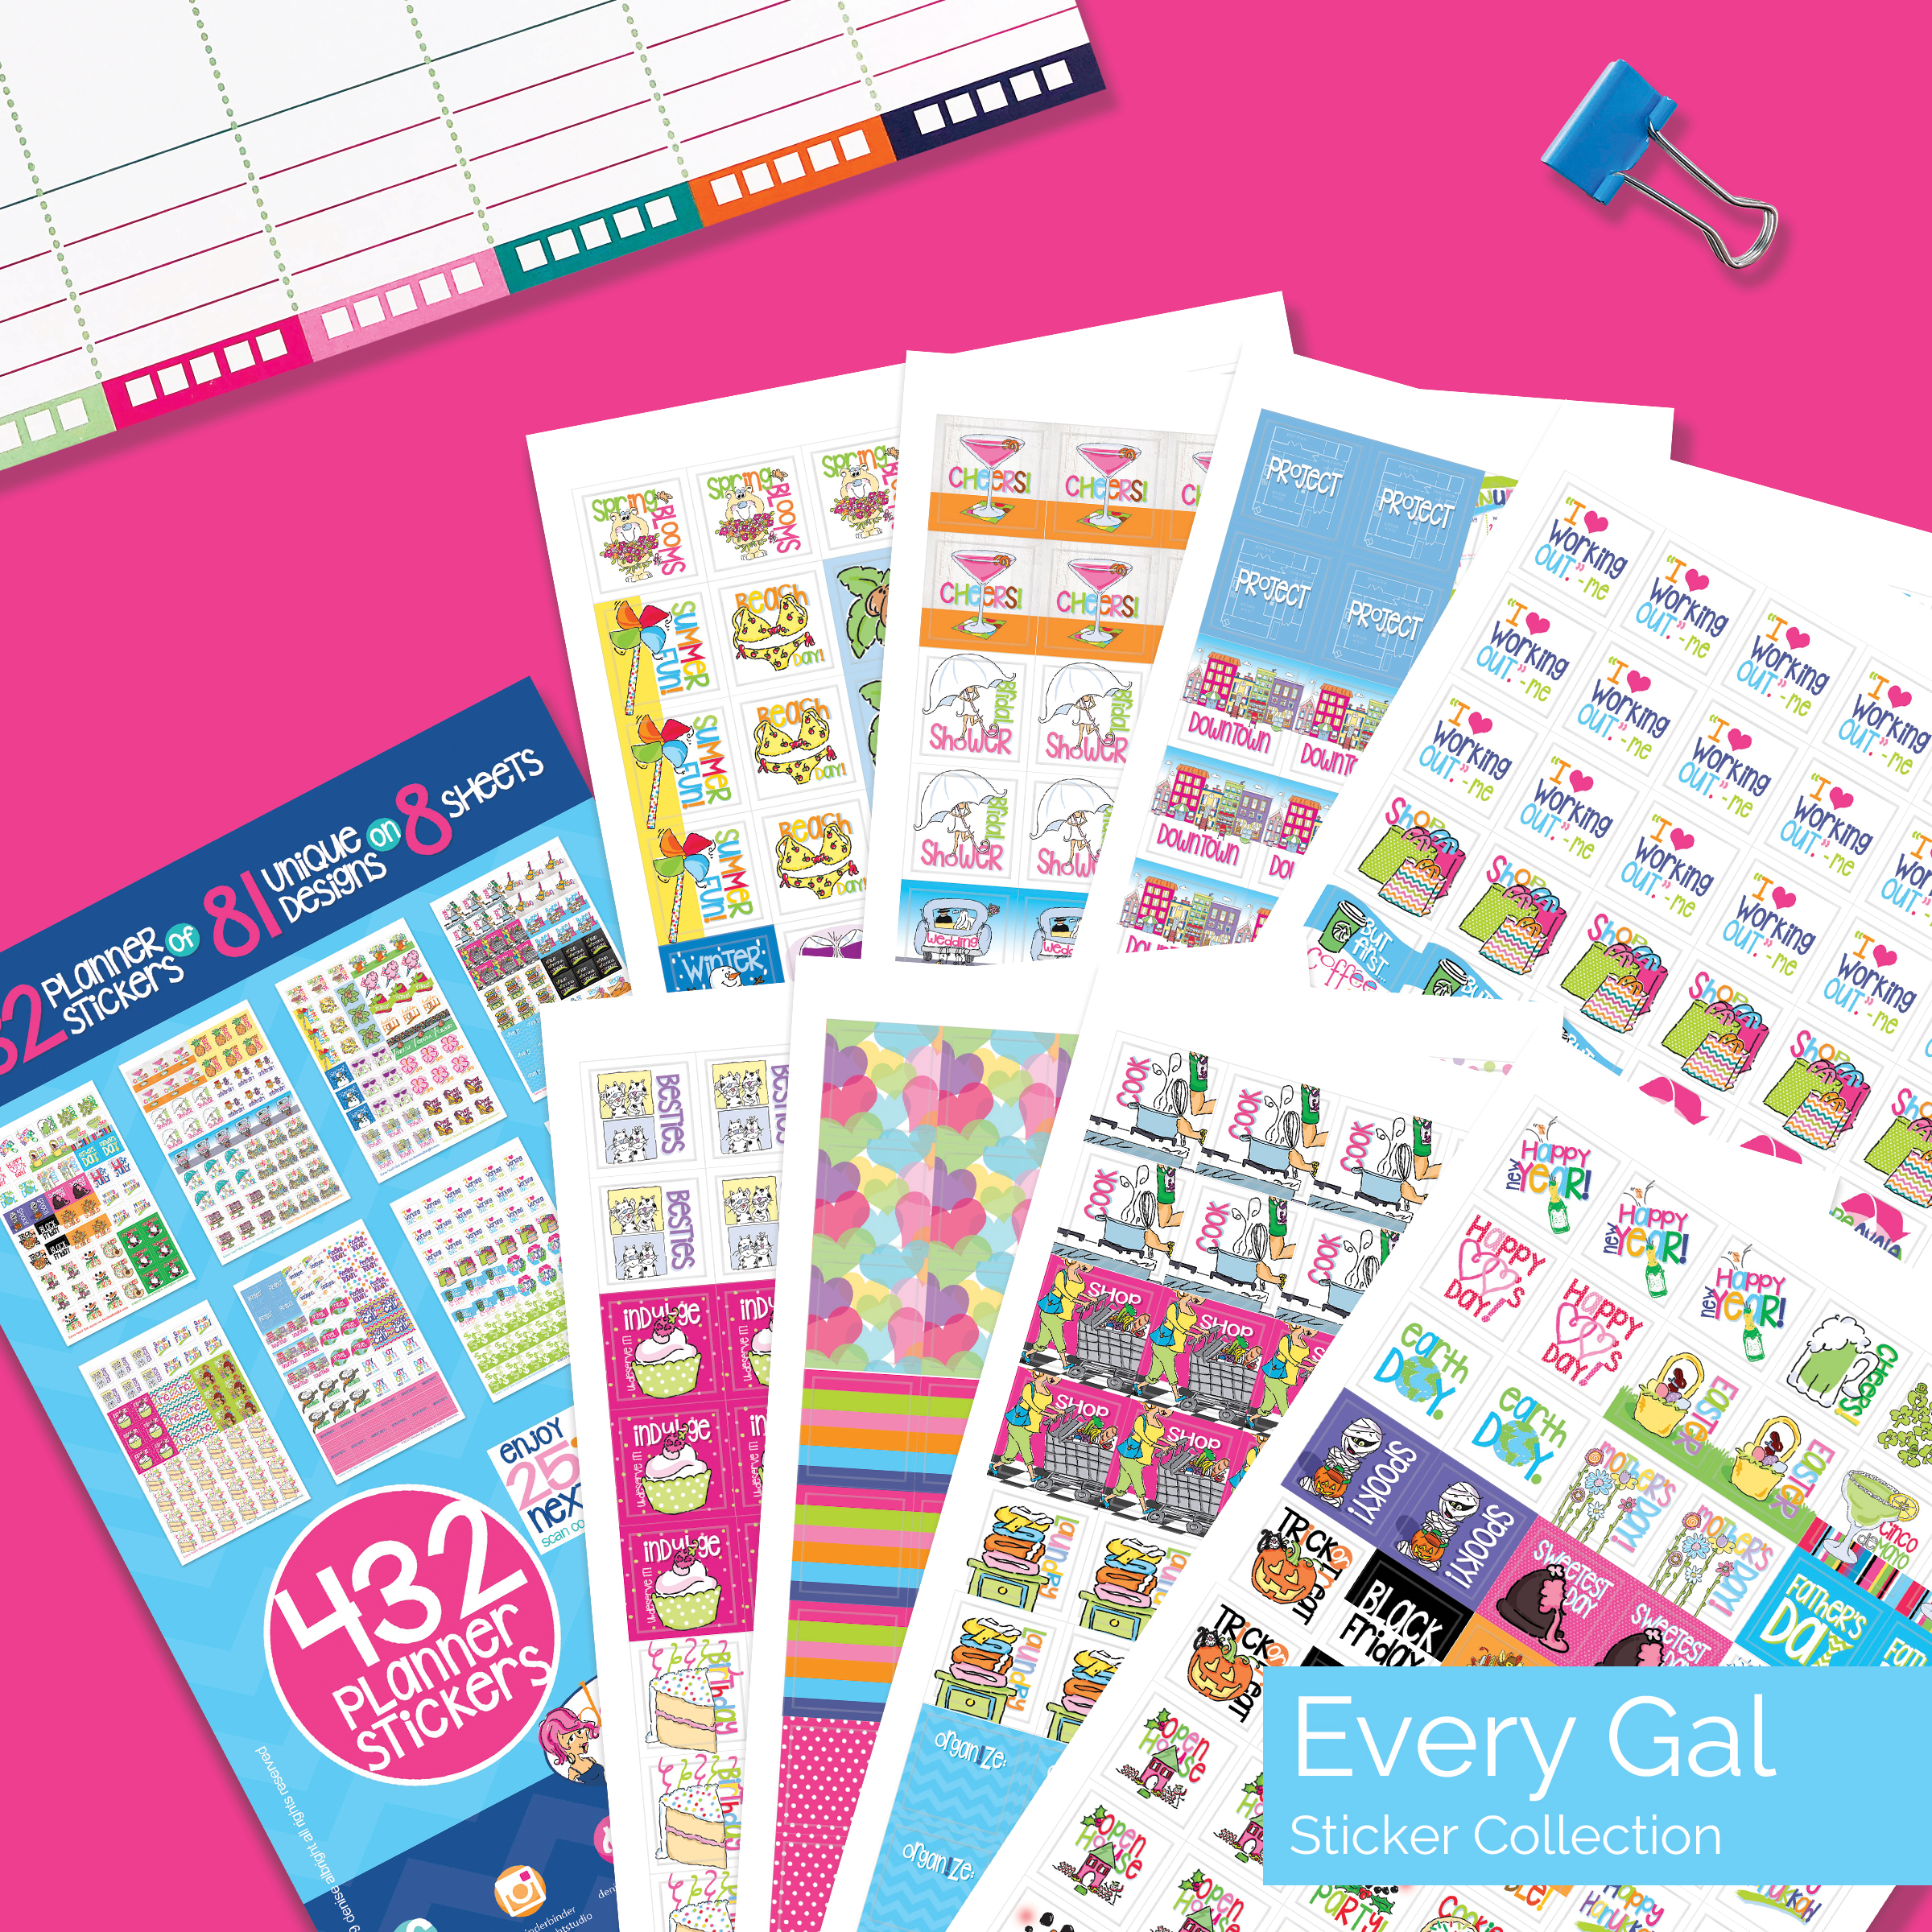 Planner Stickers, Every Gal Collection (Qty 432) - Holidays, Birthdays,  Home, Wedding, Shower, Work, Appointments, Party, Date Night, Seasons,  Workout Tracking & Tasks for any Planner or Organizer 